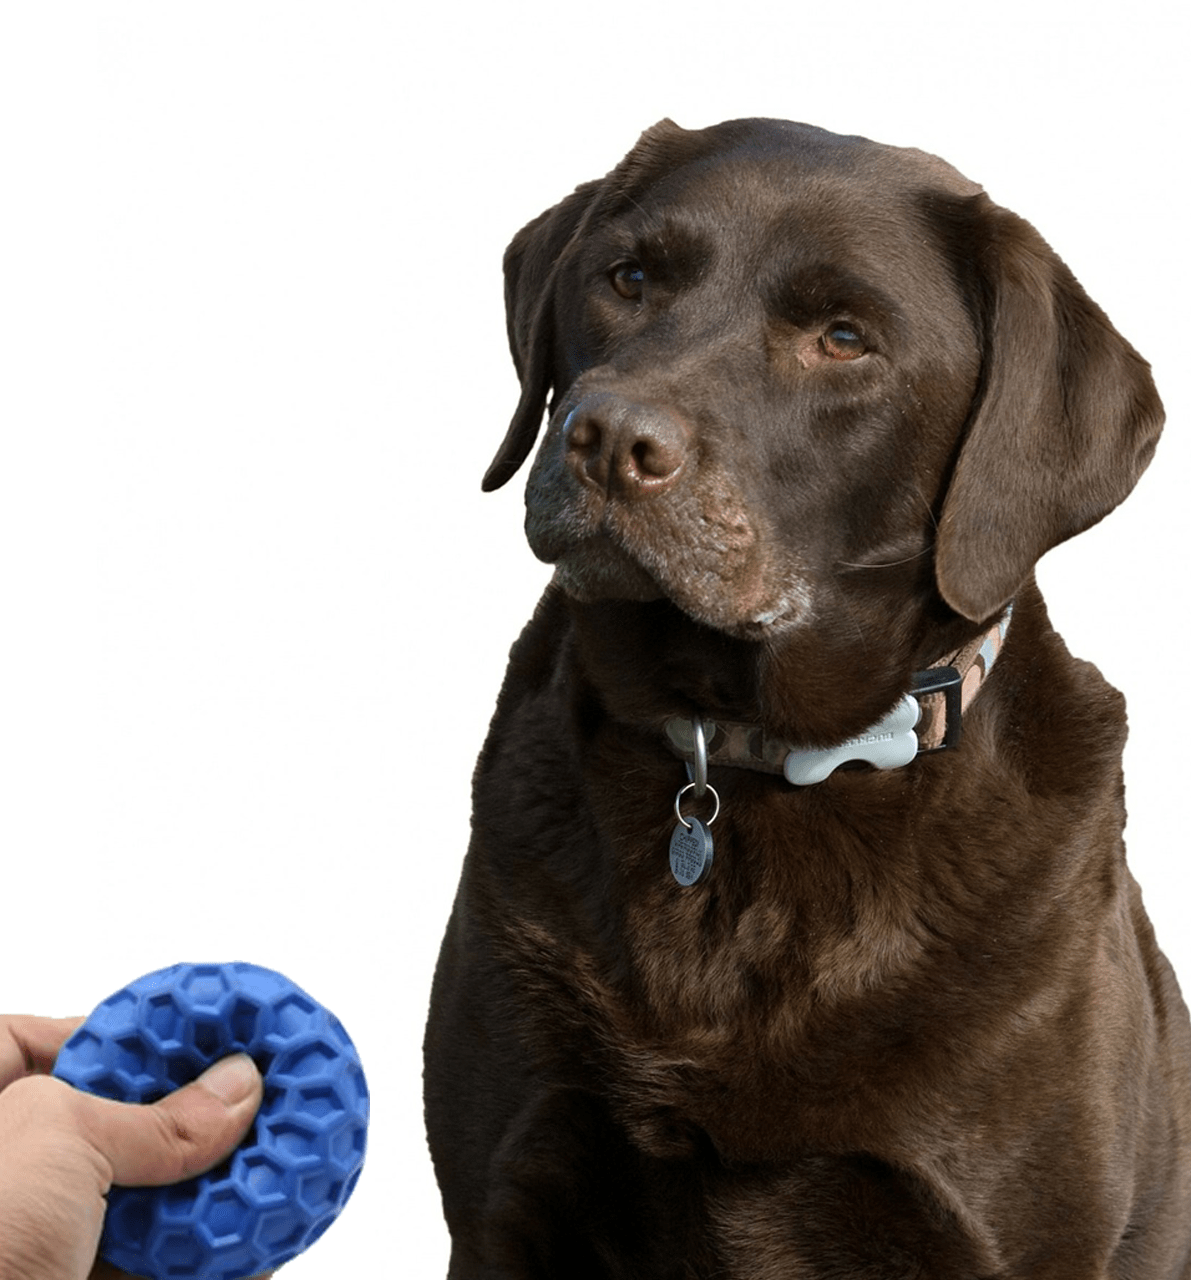 Dog looking at squeaky toy